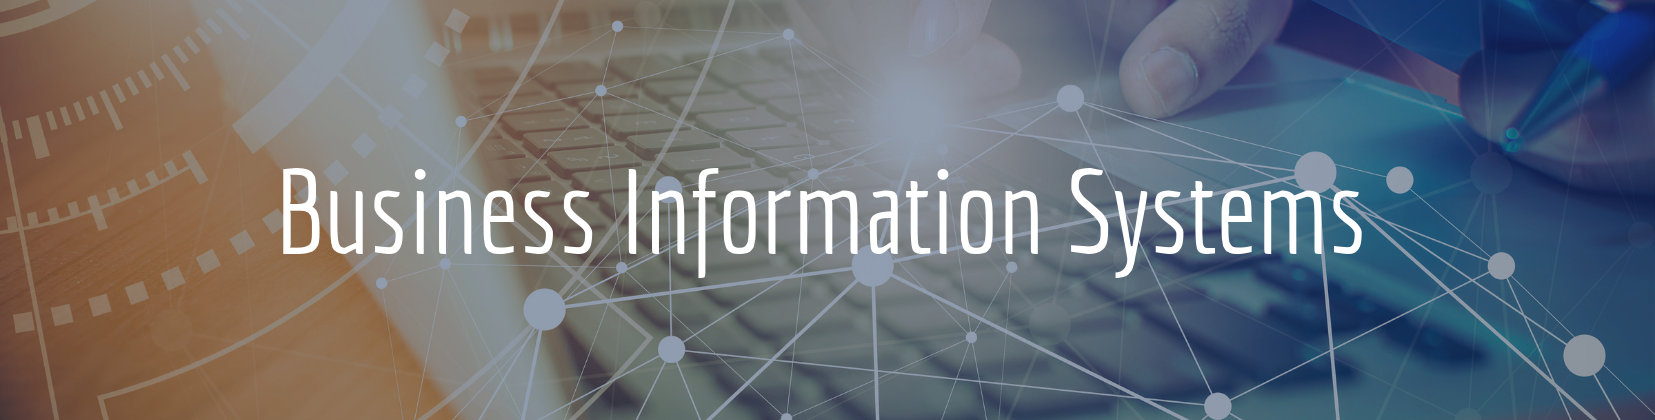 Business Information Systems Banner